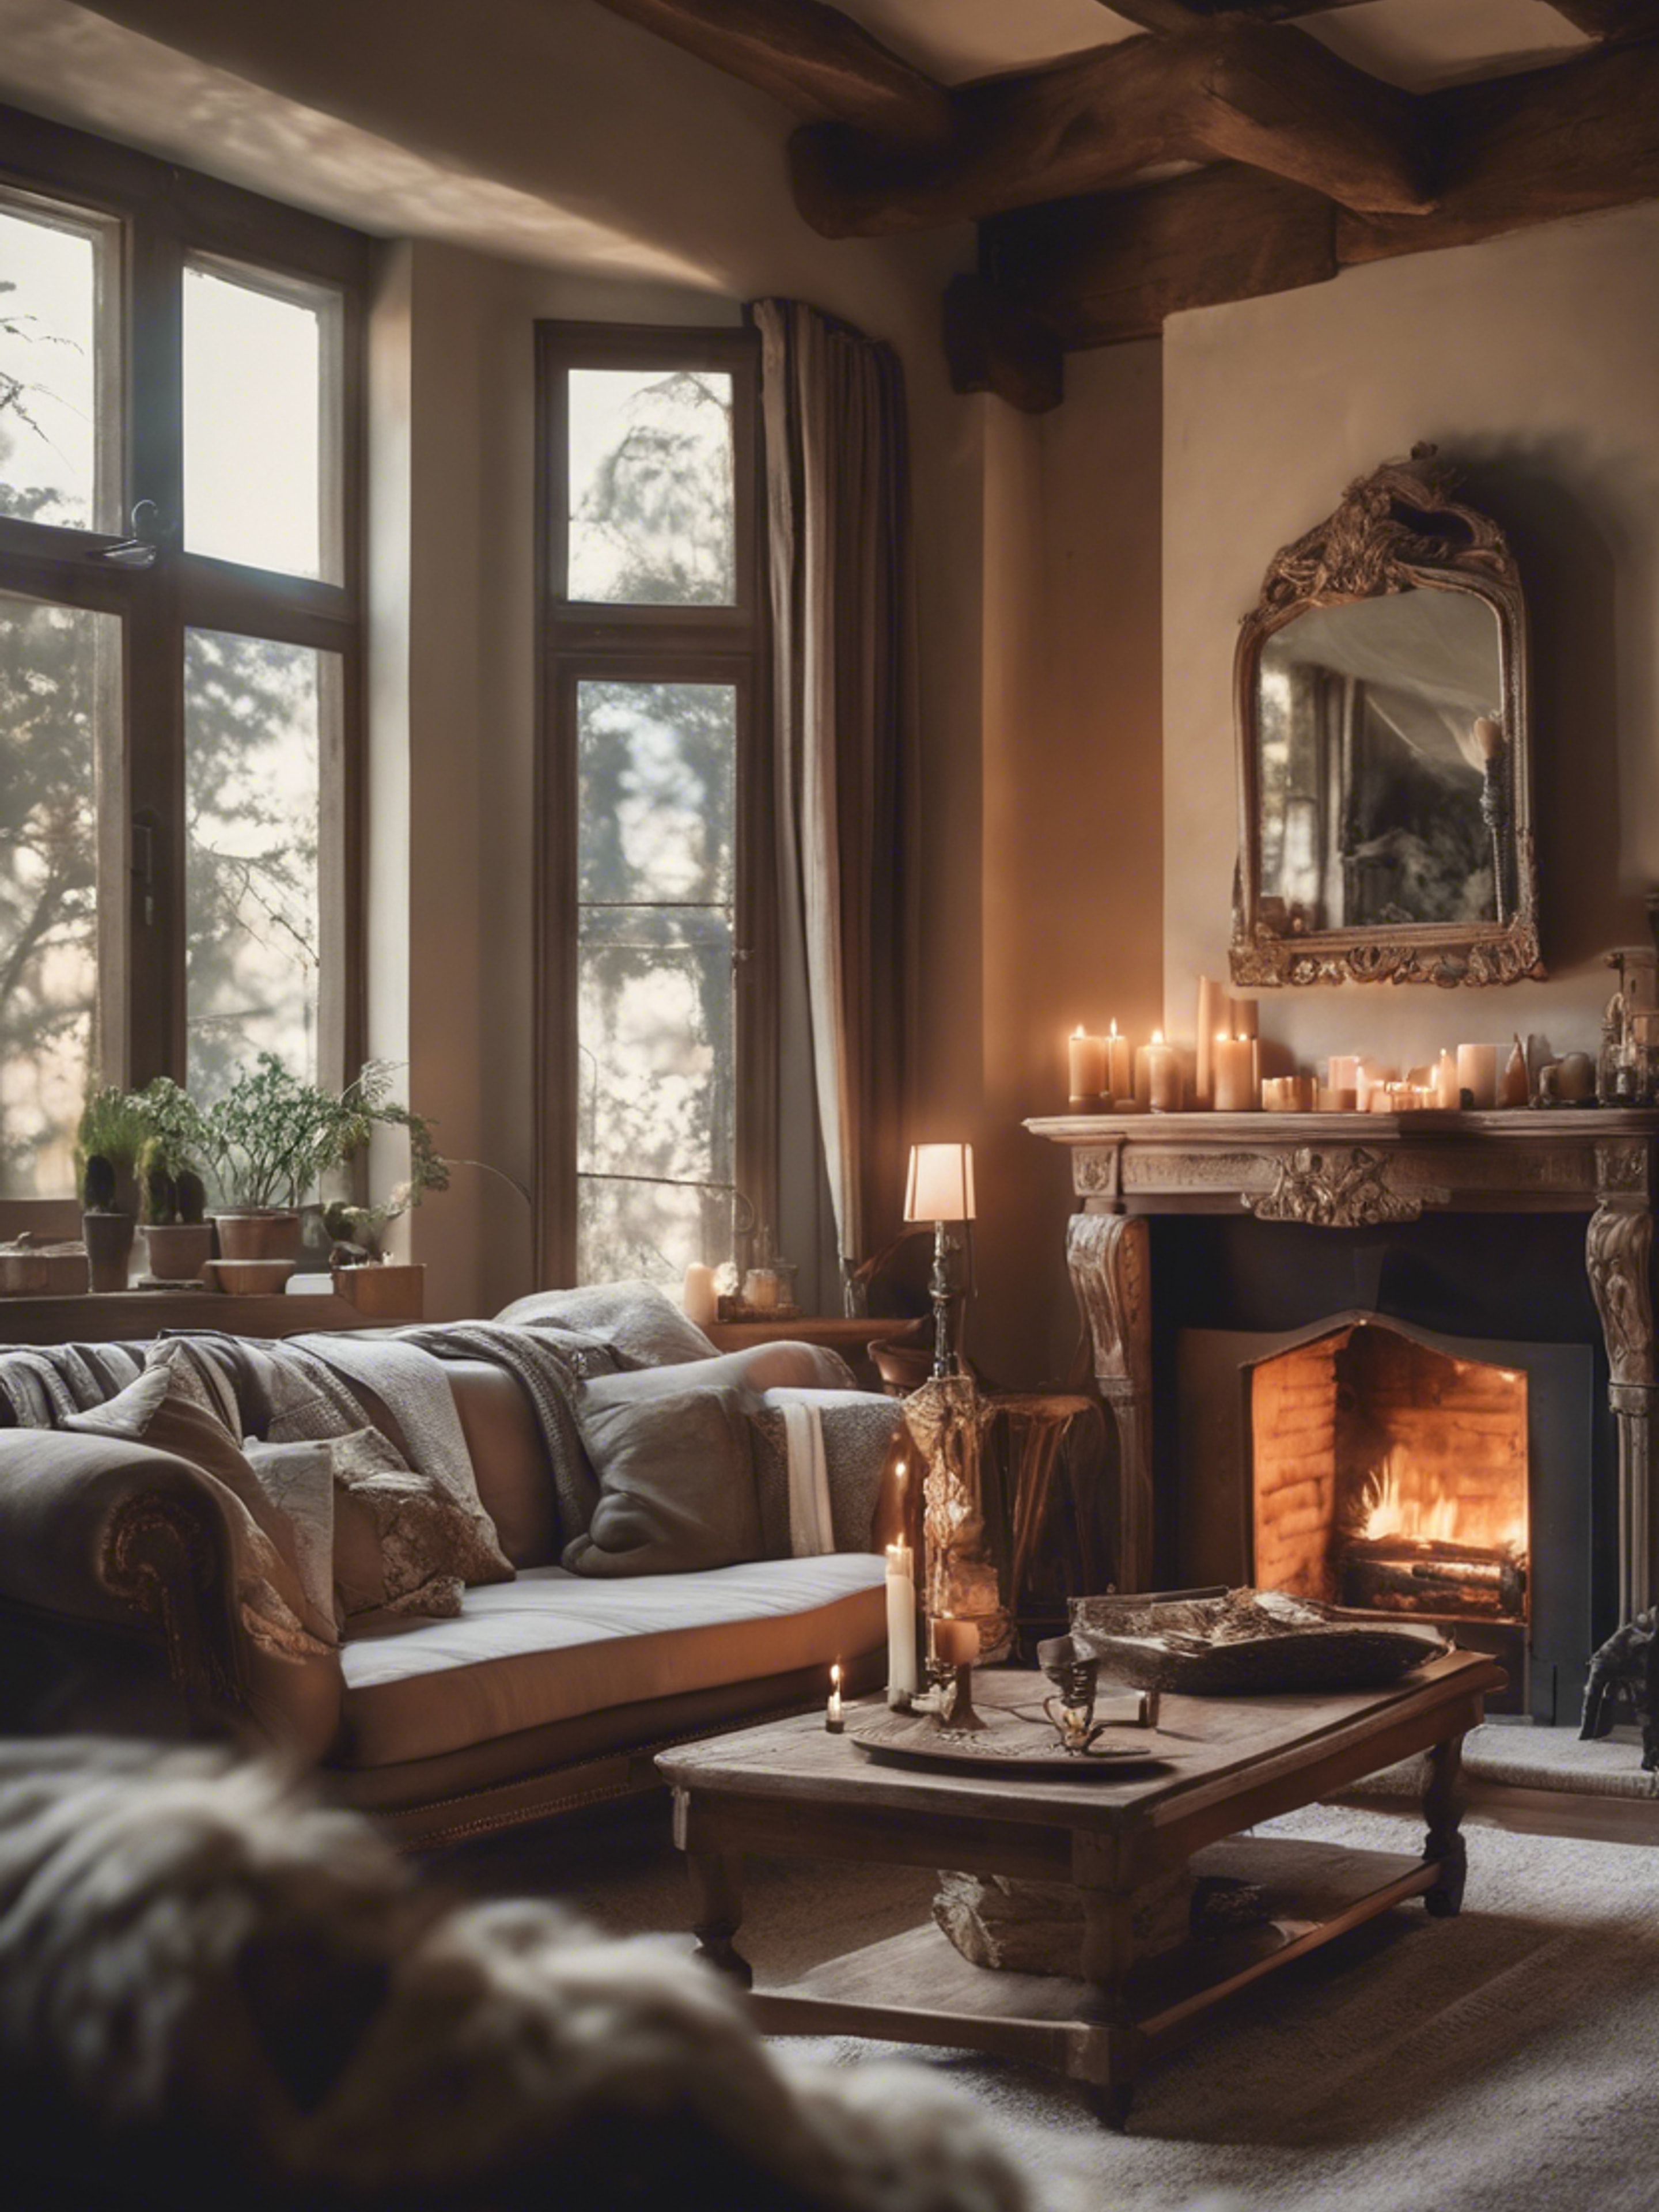 A French country style living room, cozy and comfortable with a roaring fireplace, antique furniture, and soft candlelight. Sfondo[b1f658778f85425ba676]